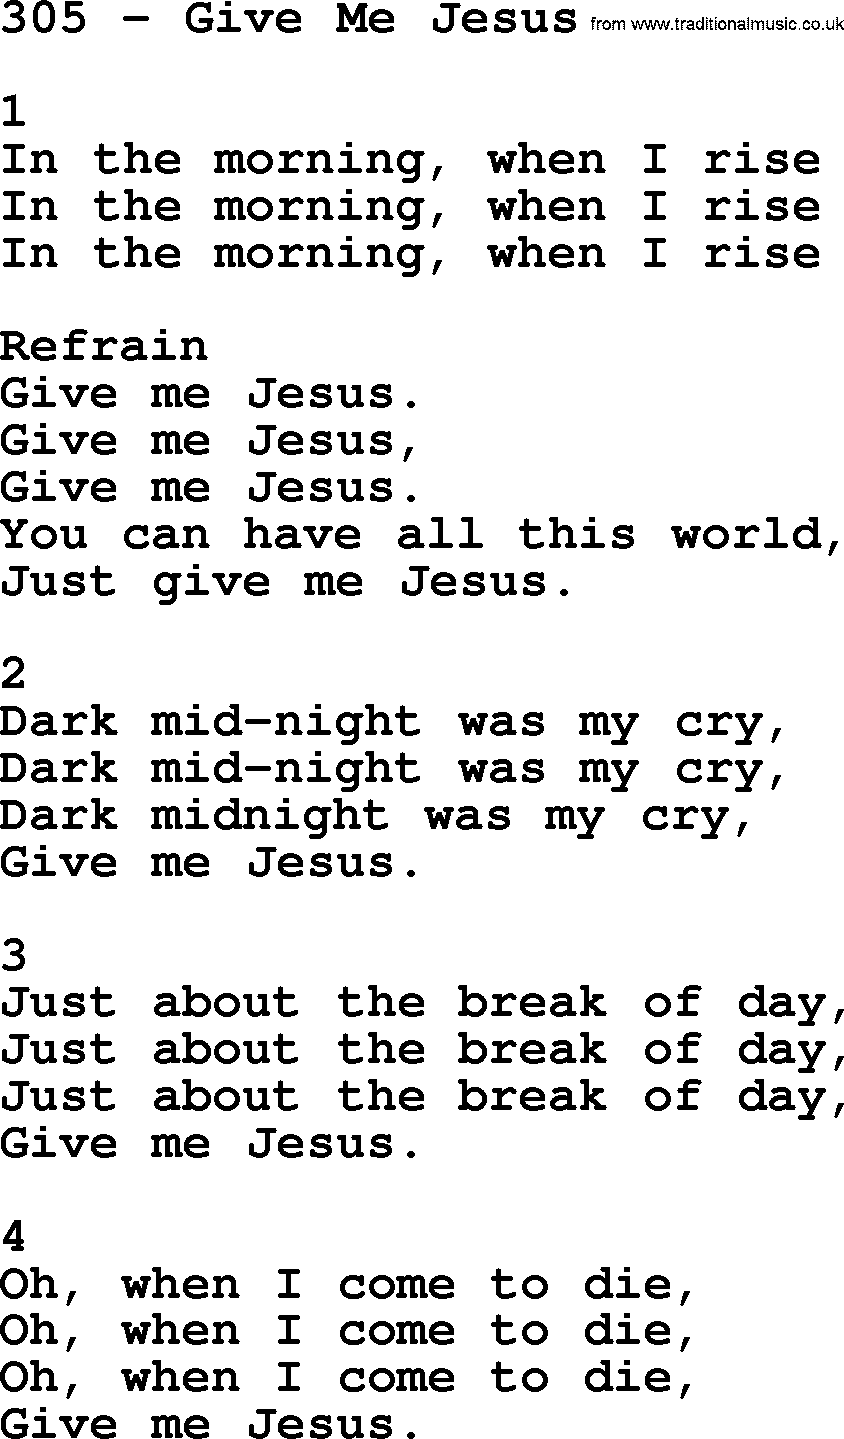 Complete Adventis Hymnal, title: 305-Give Me Jesus, with lyrics, midi, mp3, powerpoints(PPT) and PDF,